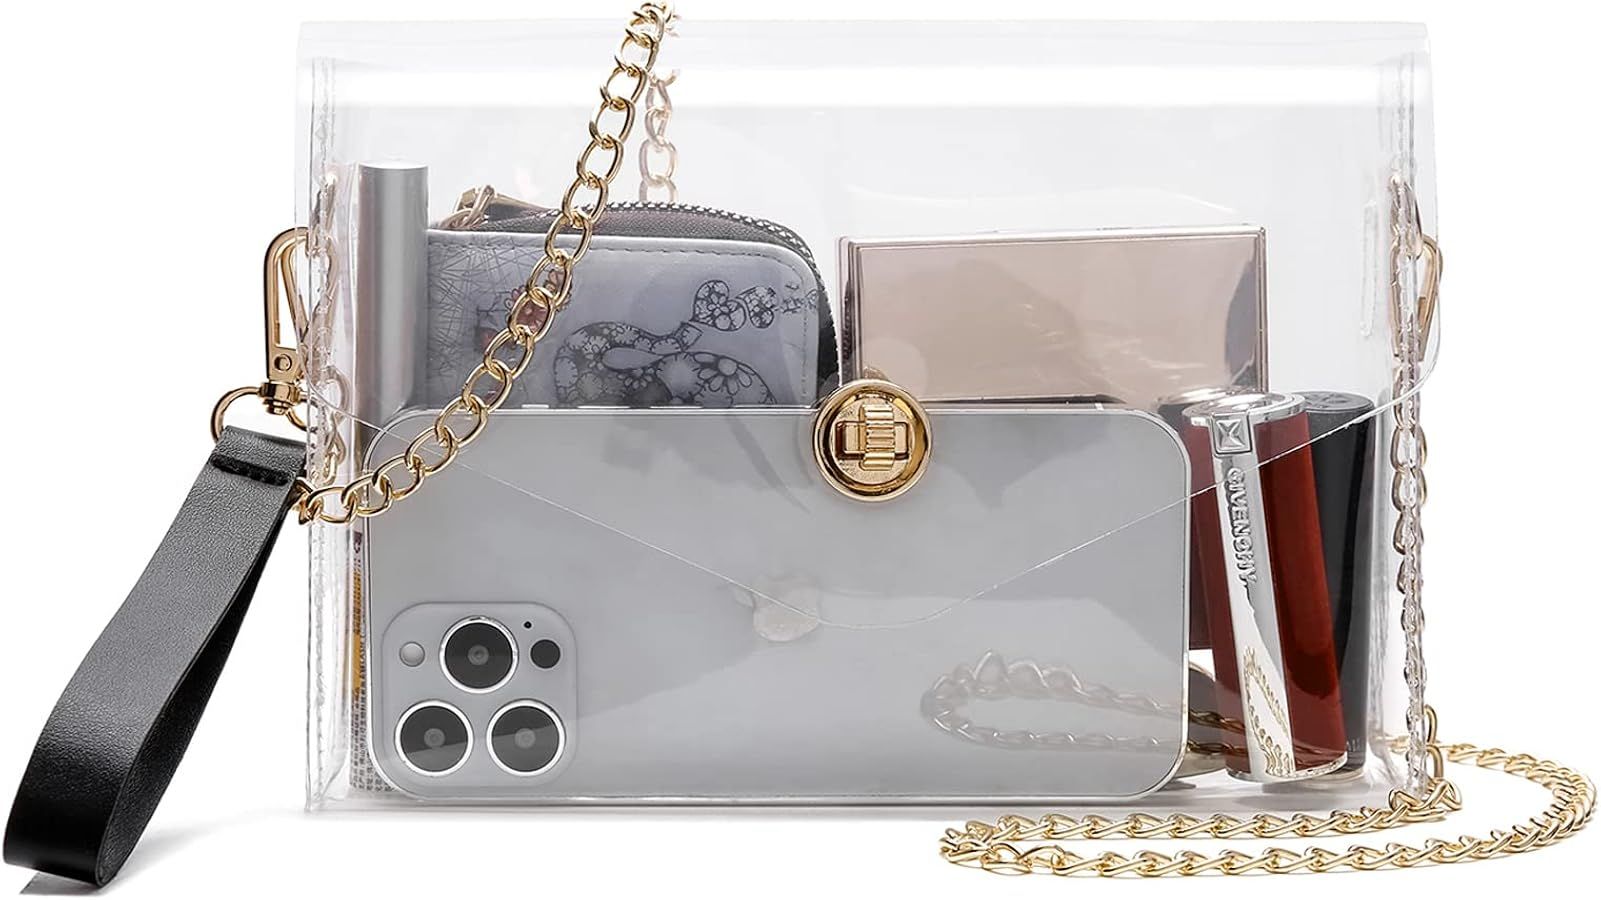 MOETYANG Transparent Clutch Clear Purse Crossbody Shoulder Bags Stadium Approved Bags | Amazon (US)